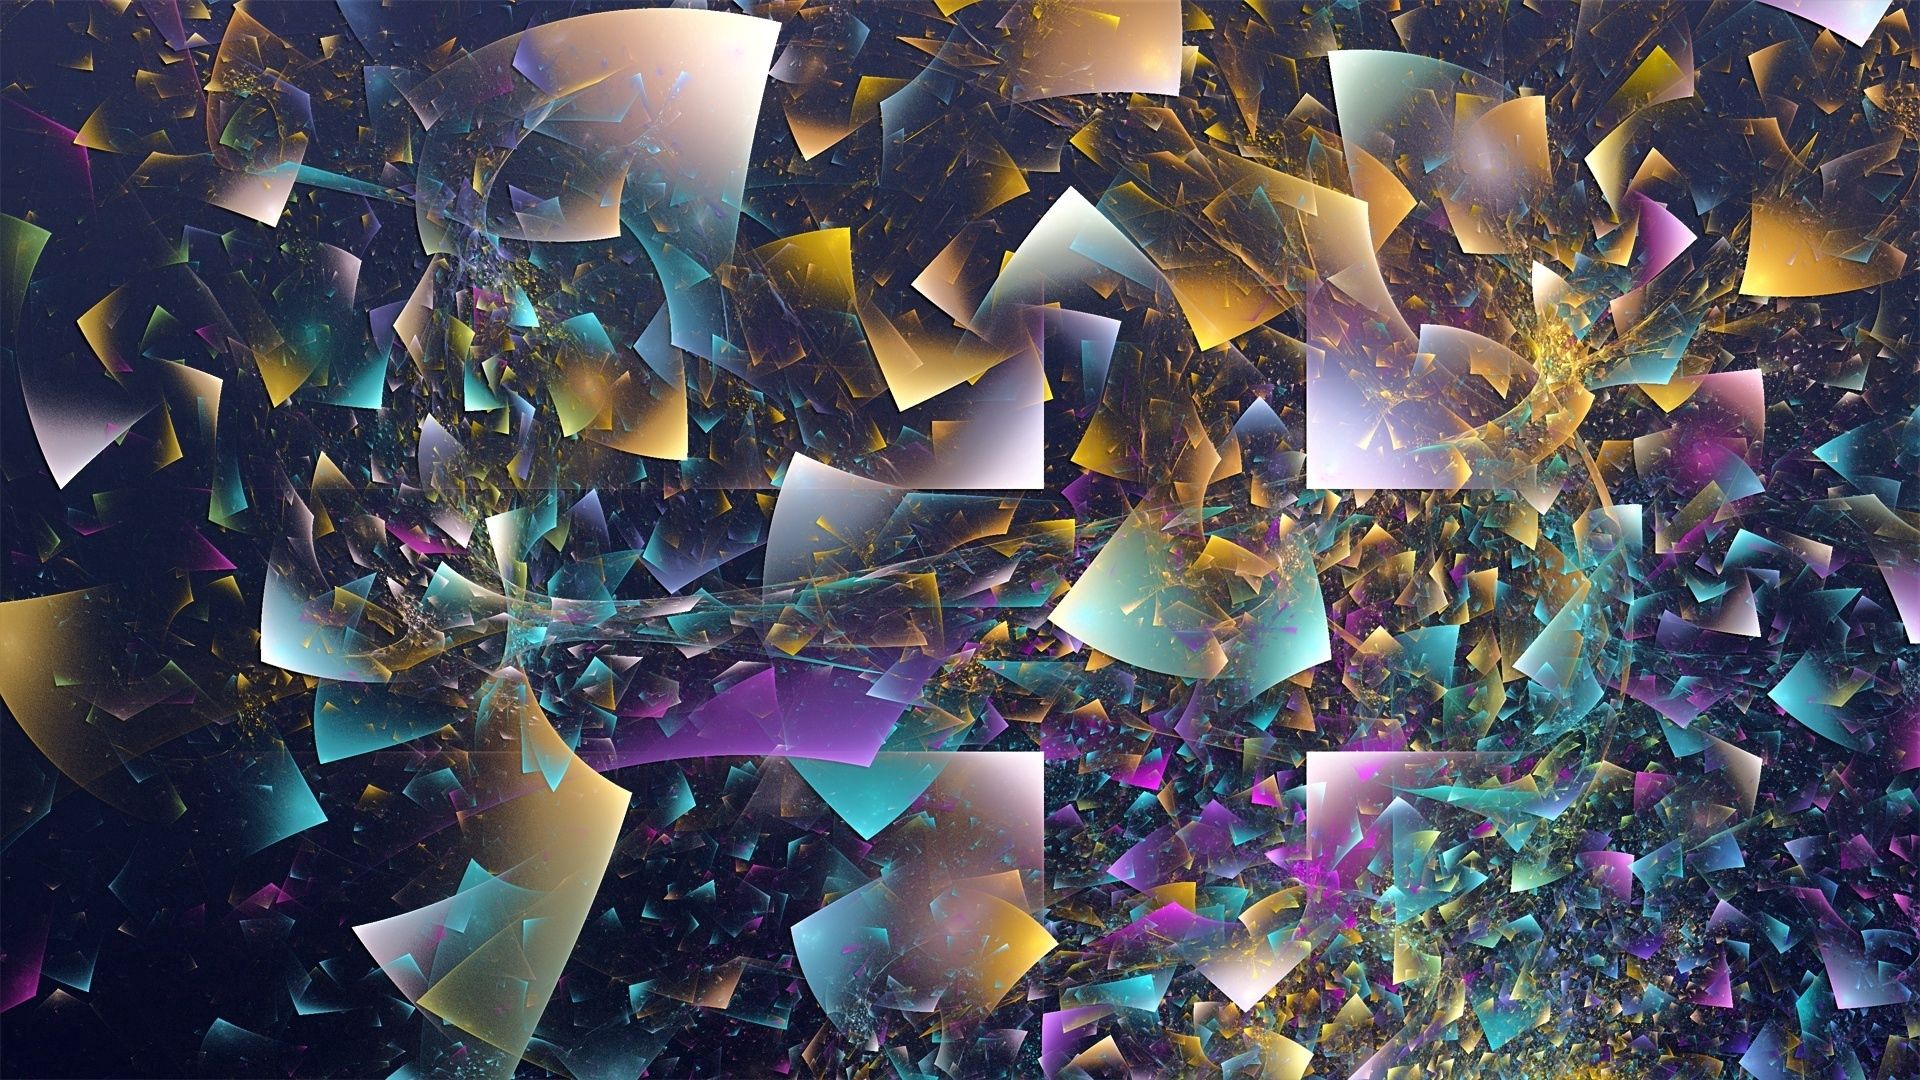 Desktop FHD stains, abstract, background, multicolored, motley, spots, shards, smithereens